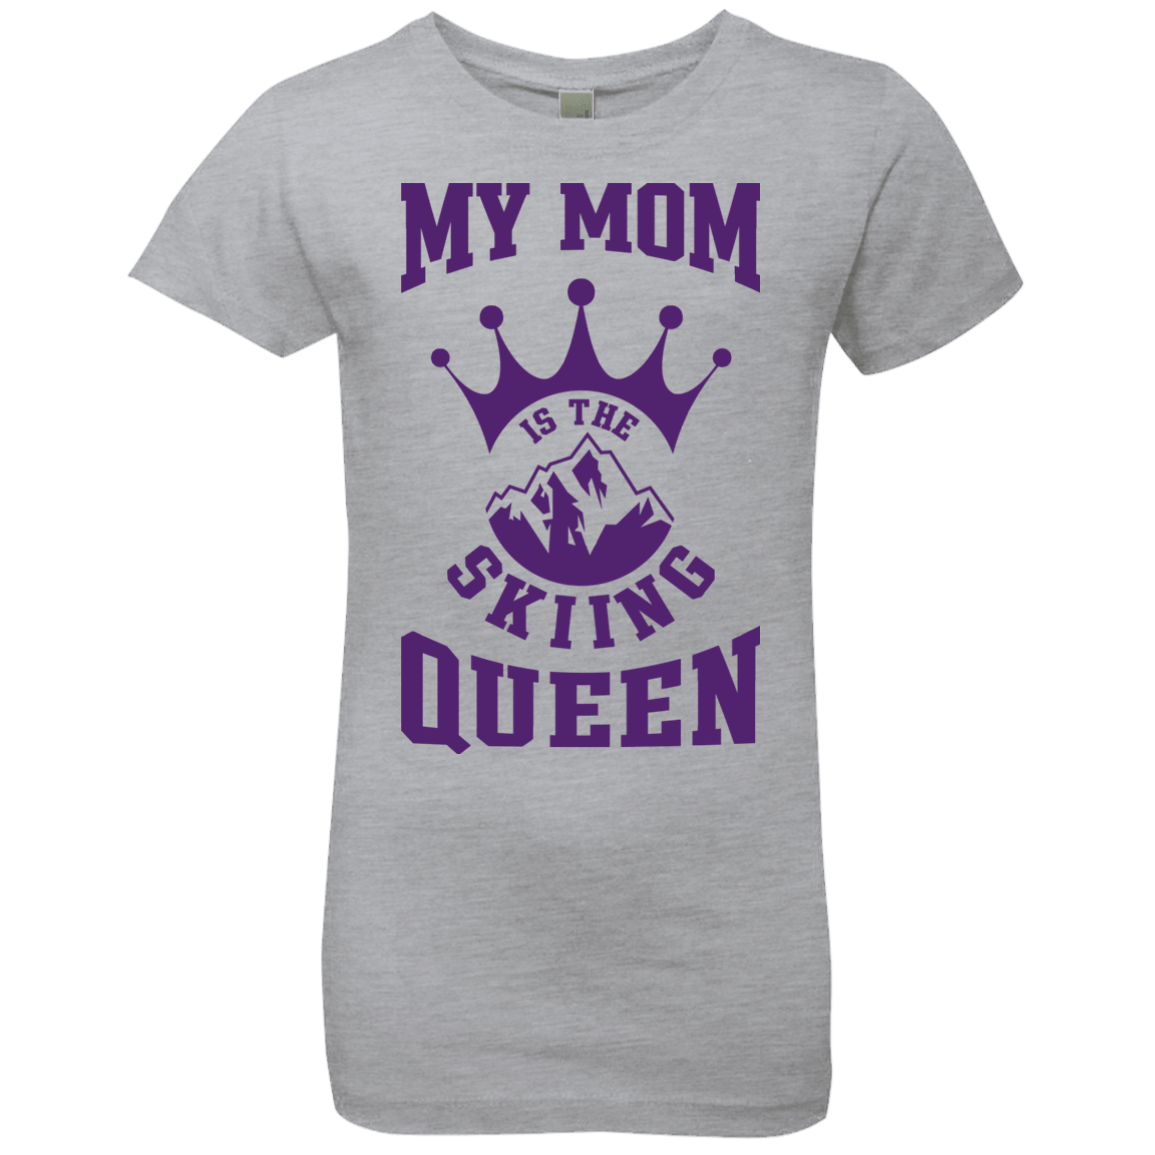 My Mom Is The Skiing Queen Purple Youth Next Level Girls' Princess T-Shirt - Powderaddicts